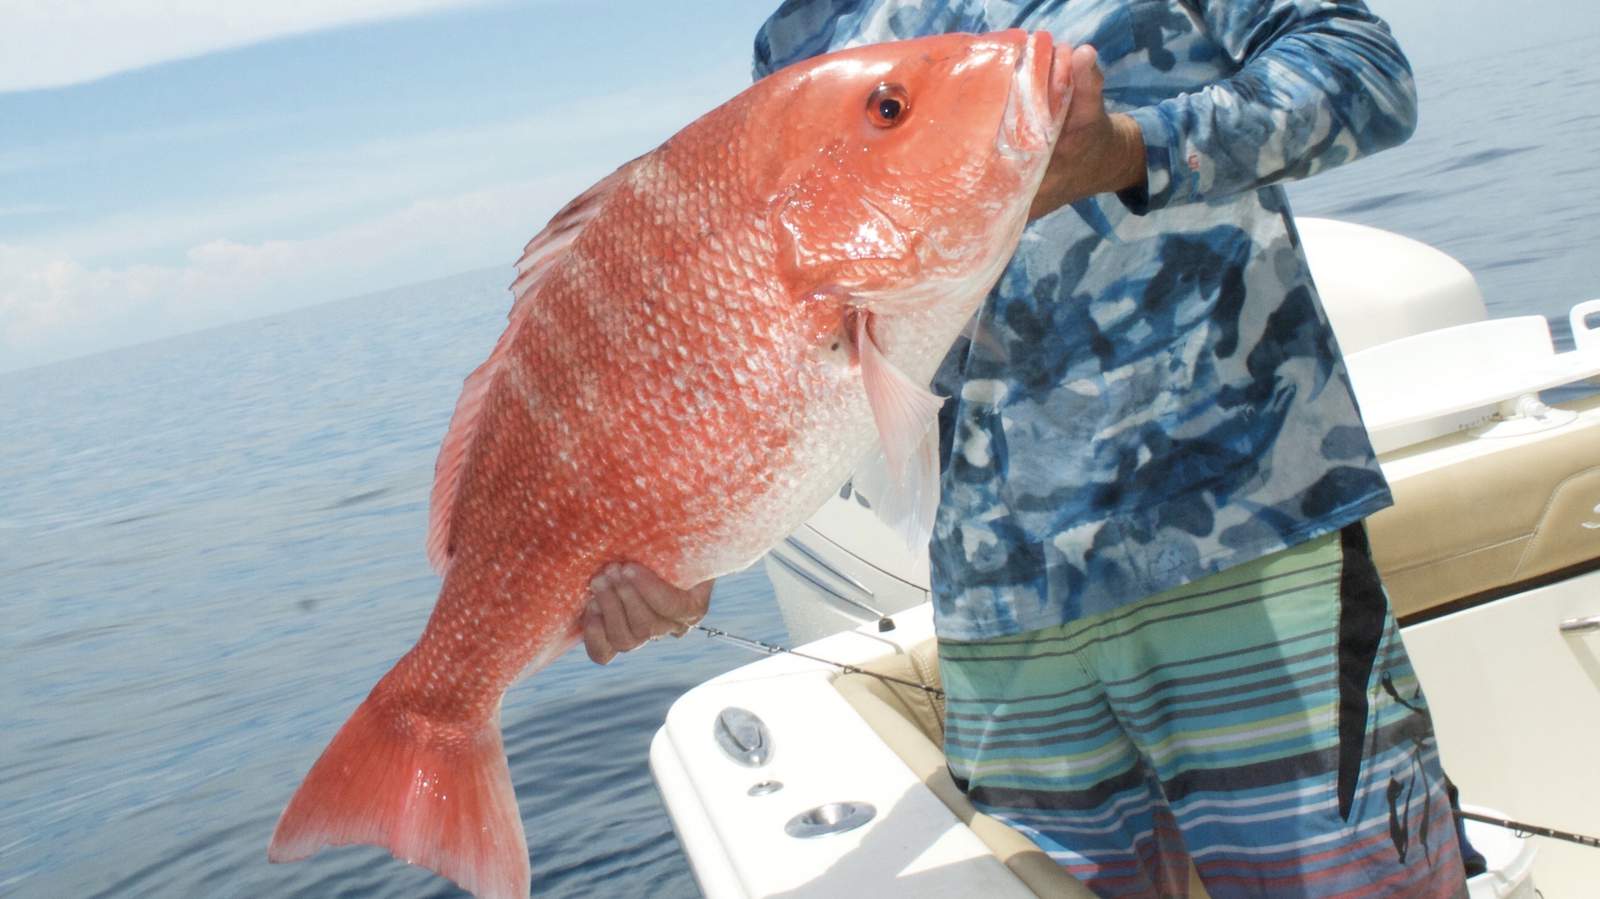 There are millions of more red snapper off the Texas coast than previously estimated. Here’s why